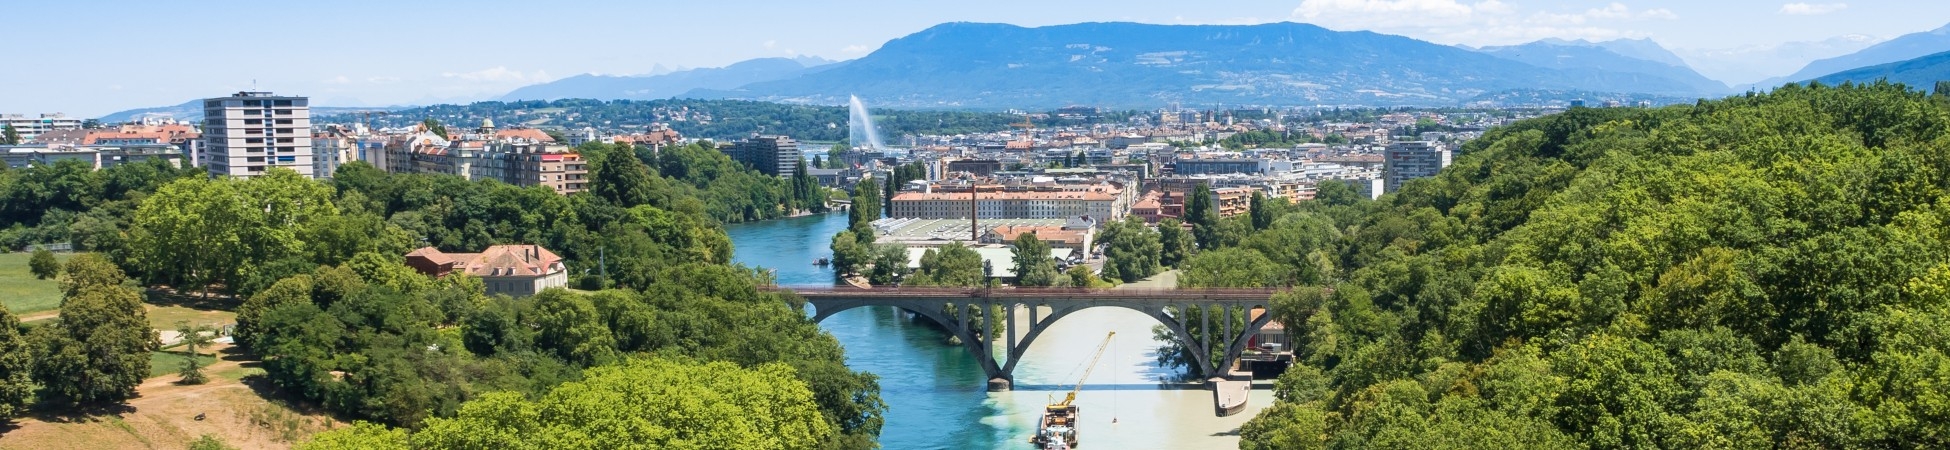 Aerial view of Geneva city in Switzerland during a sunny day